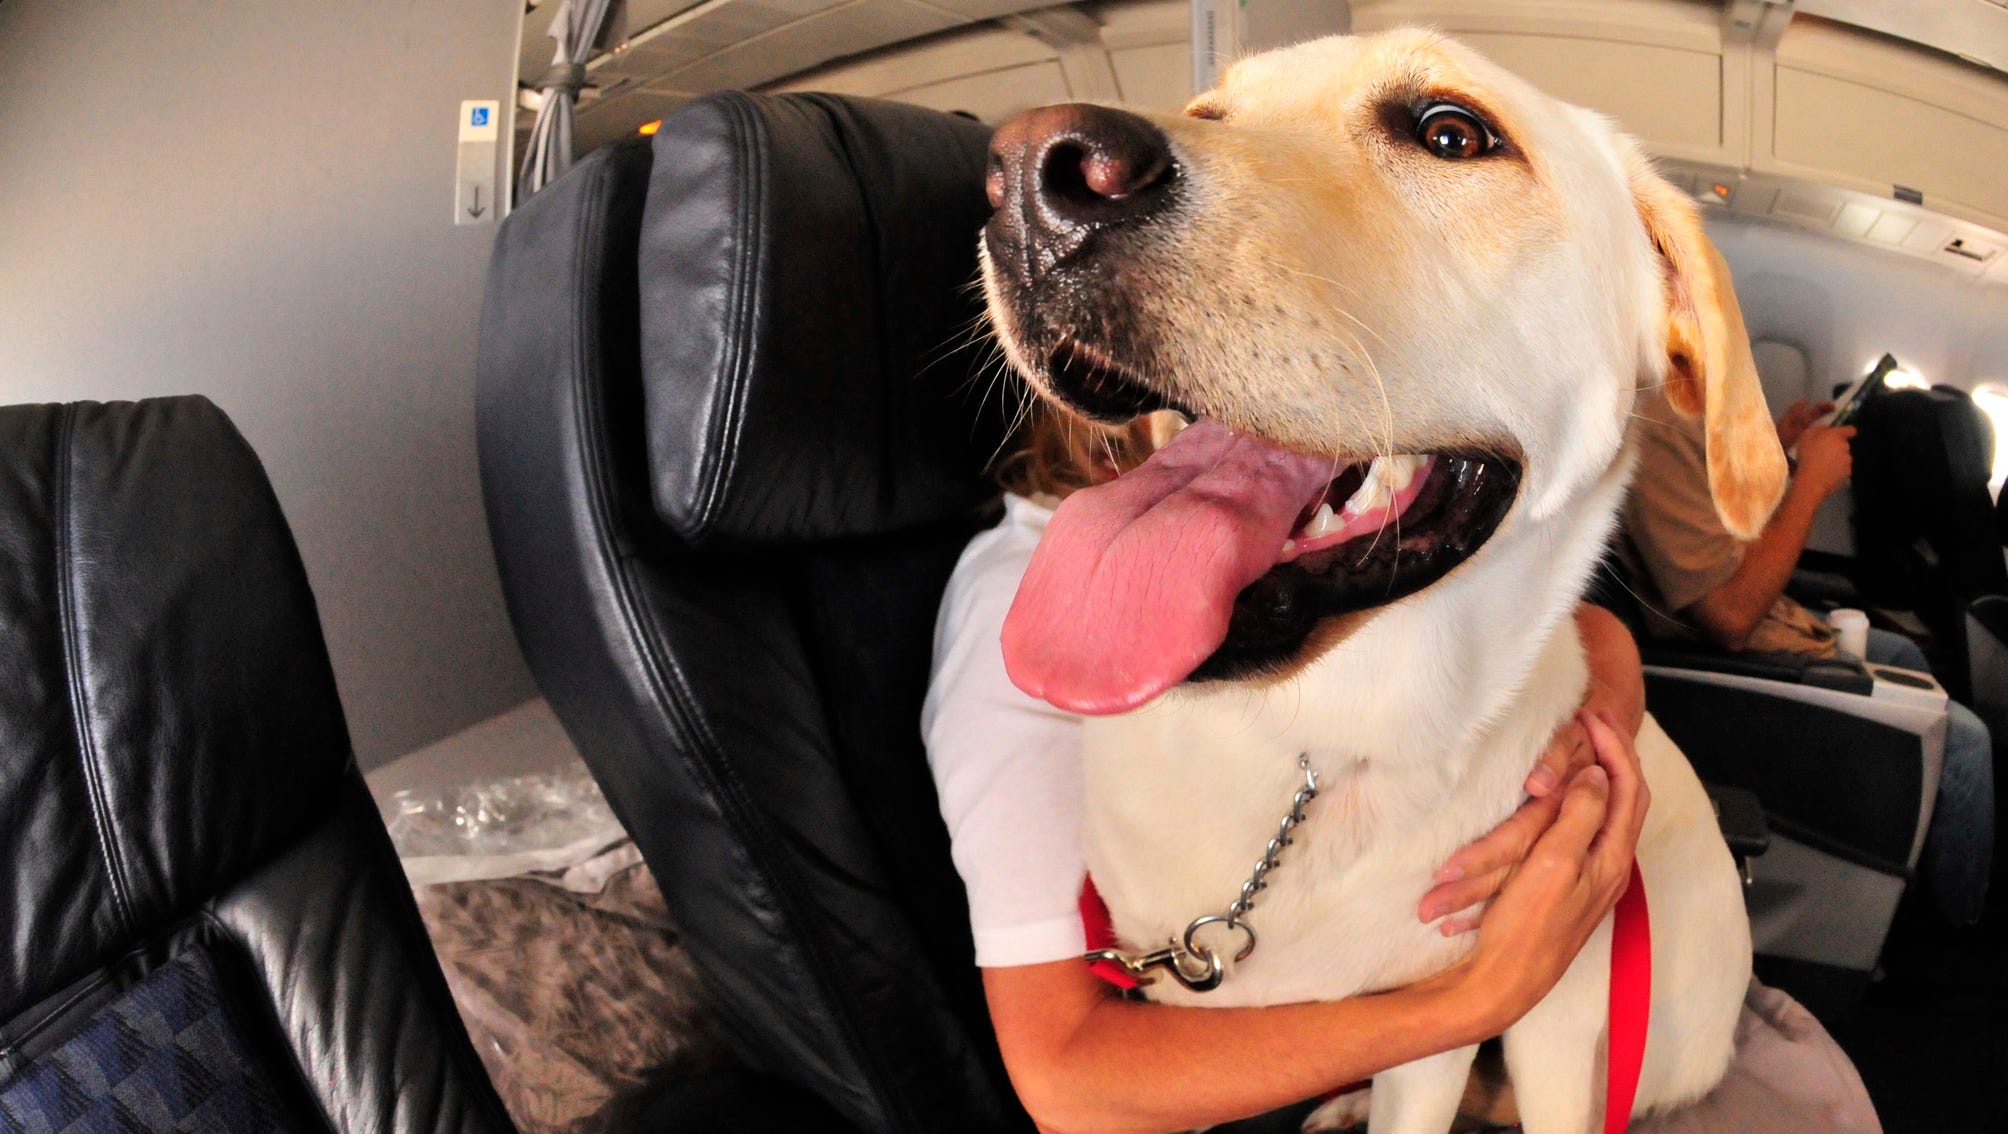 Fur flies: DOT gets 4,400 comments about animals on flights